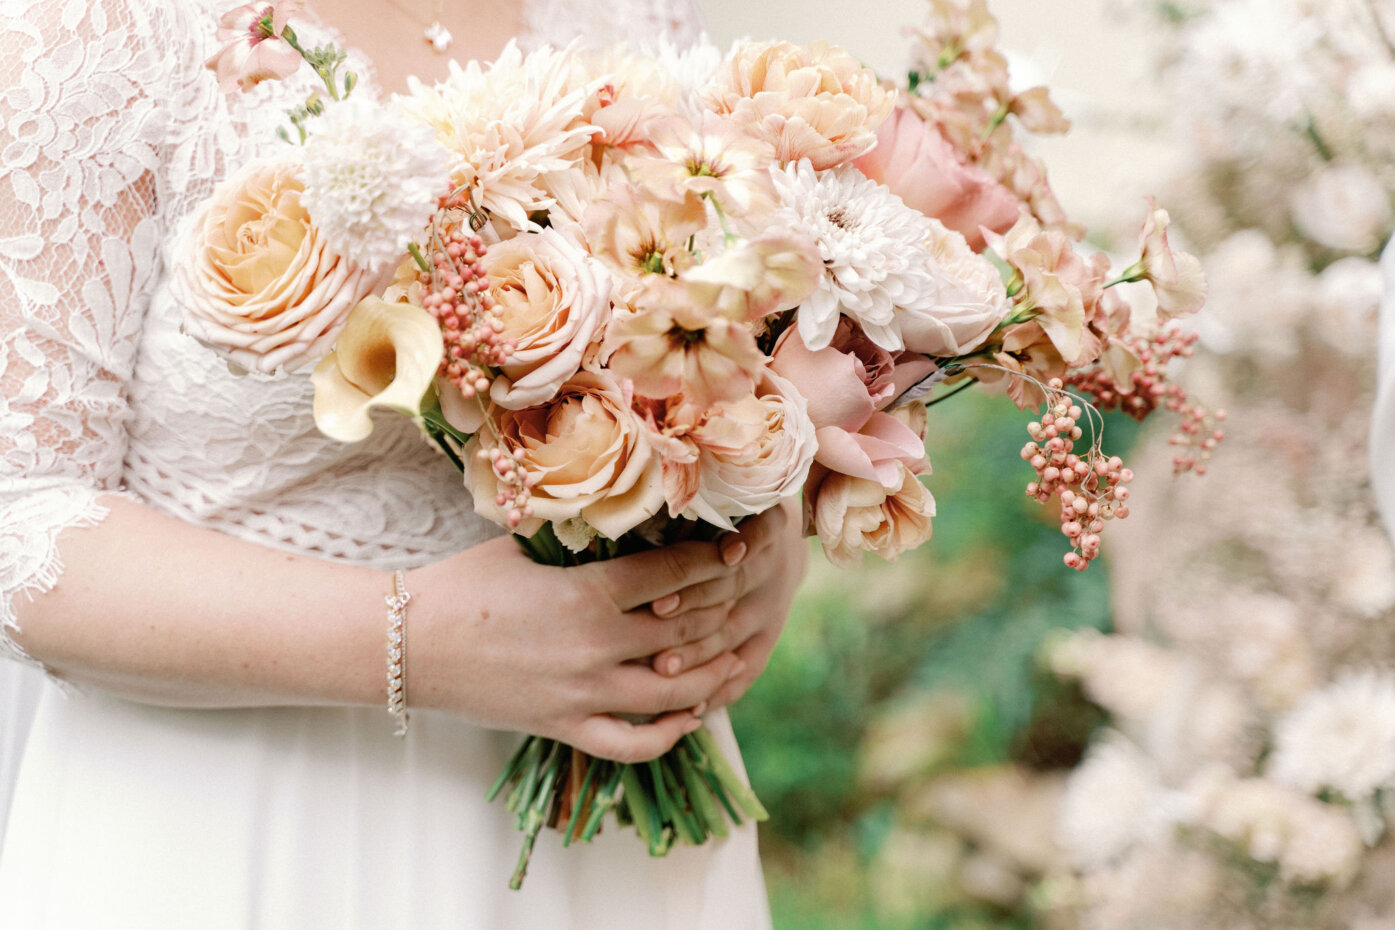 Beautiful Bridal bouquet in pastel caramel and terracotta shades